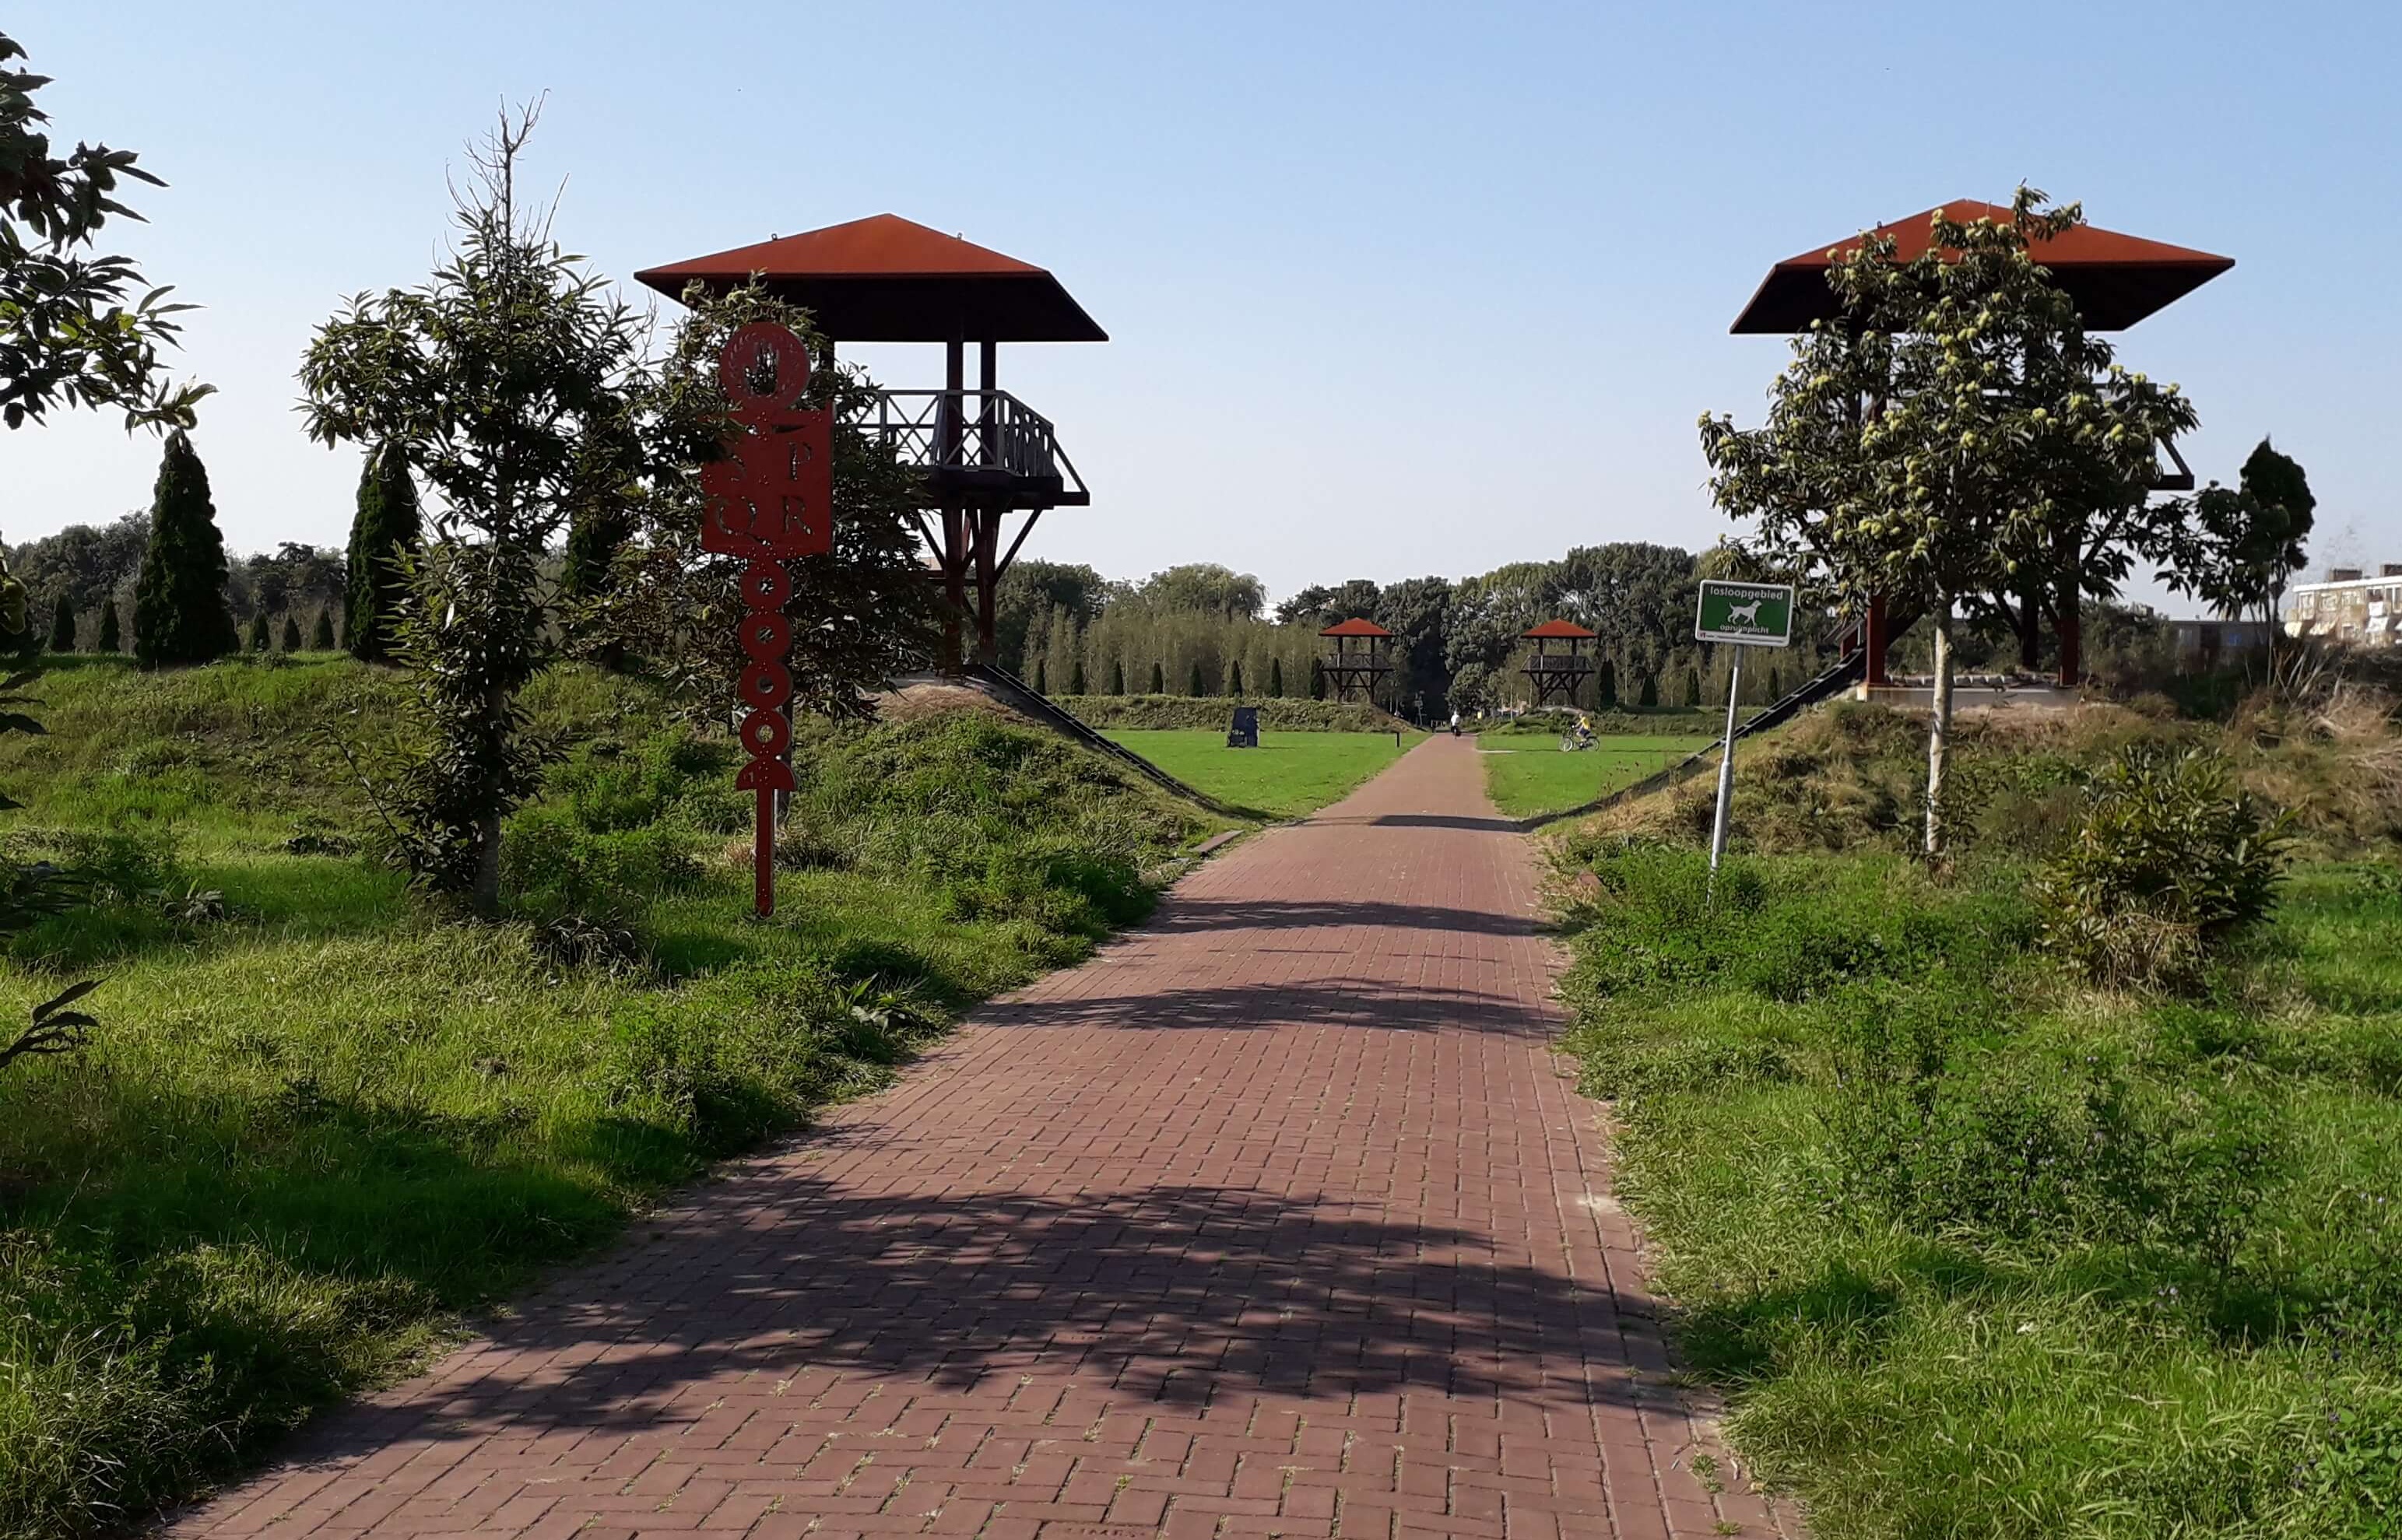 A photo of the Dutch "Park Matilo" in Leiden/Roomburg, the modern reconstruction of the Roman fort there.